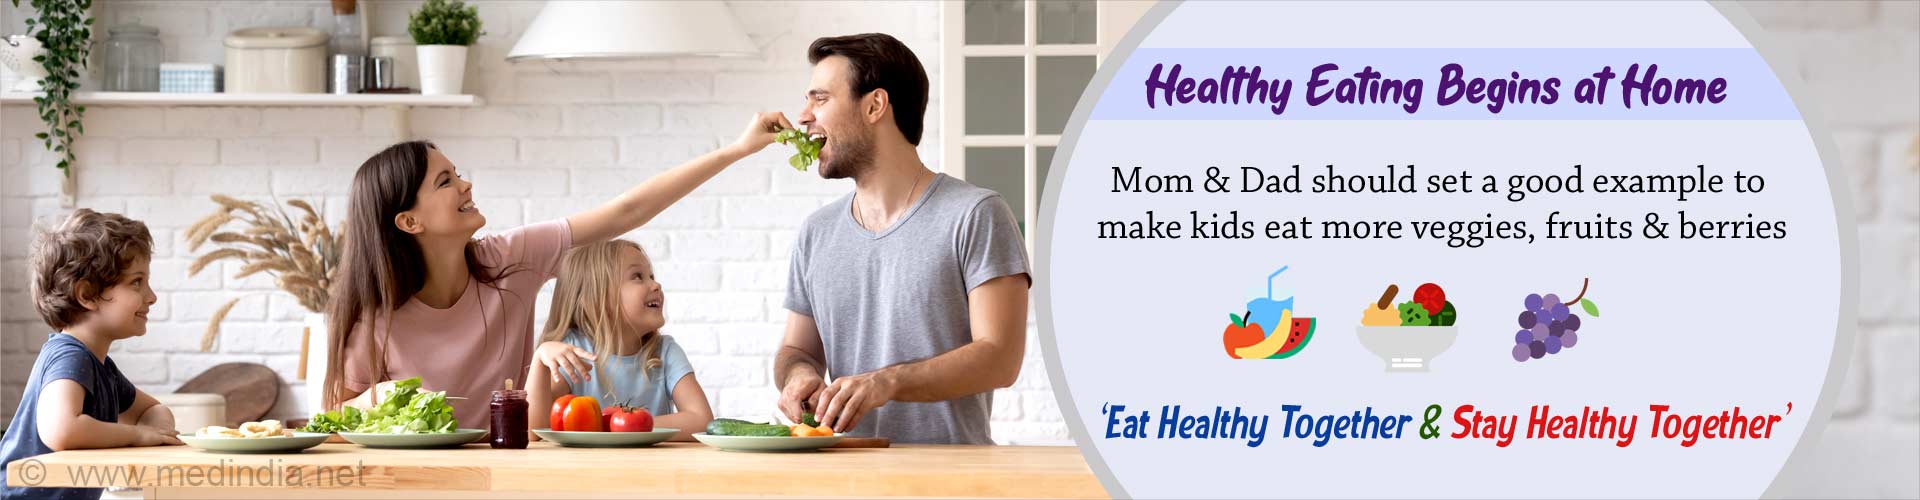 Healthy eating begins at home. Mom and Dad should set a good example to make kids eat more veggies, fruits and berries. Eat healthy together and stay healthy together.